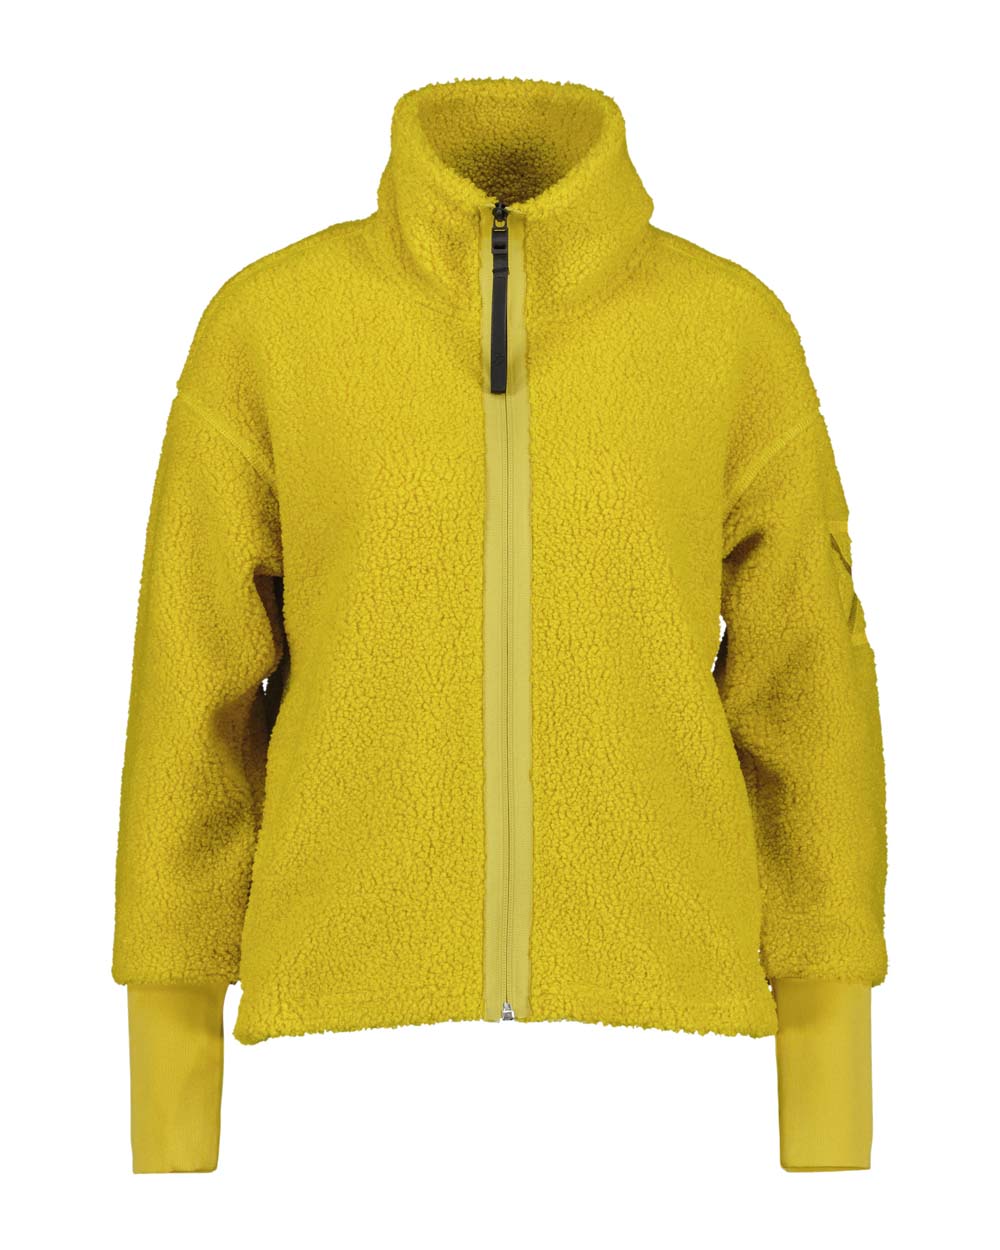 Yellow Bloom coloured Didriksons Full-Zip Fleece Jacket on White background 